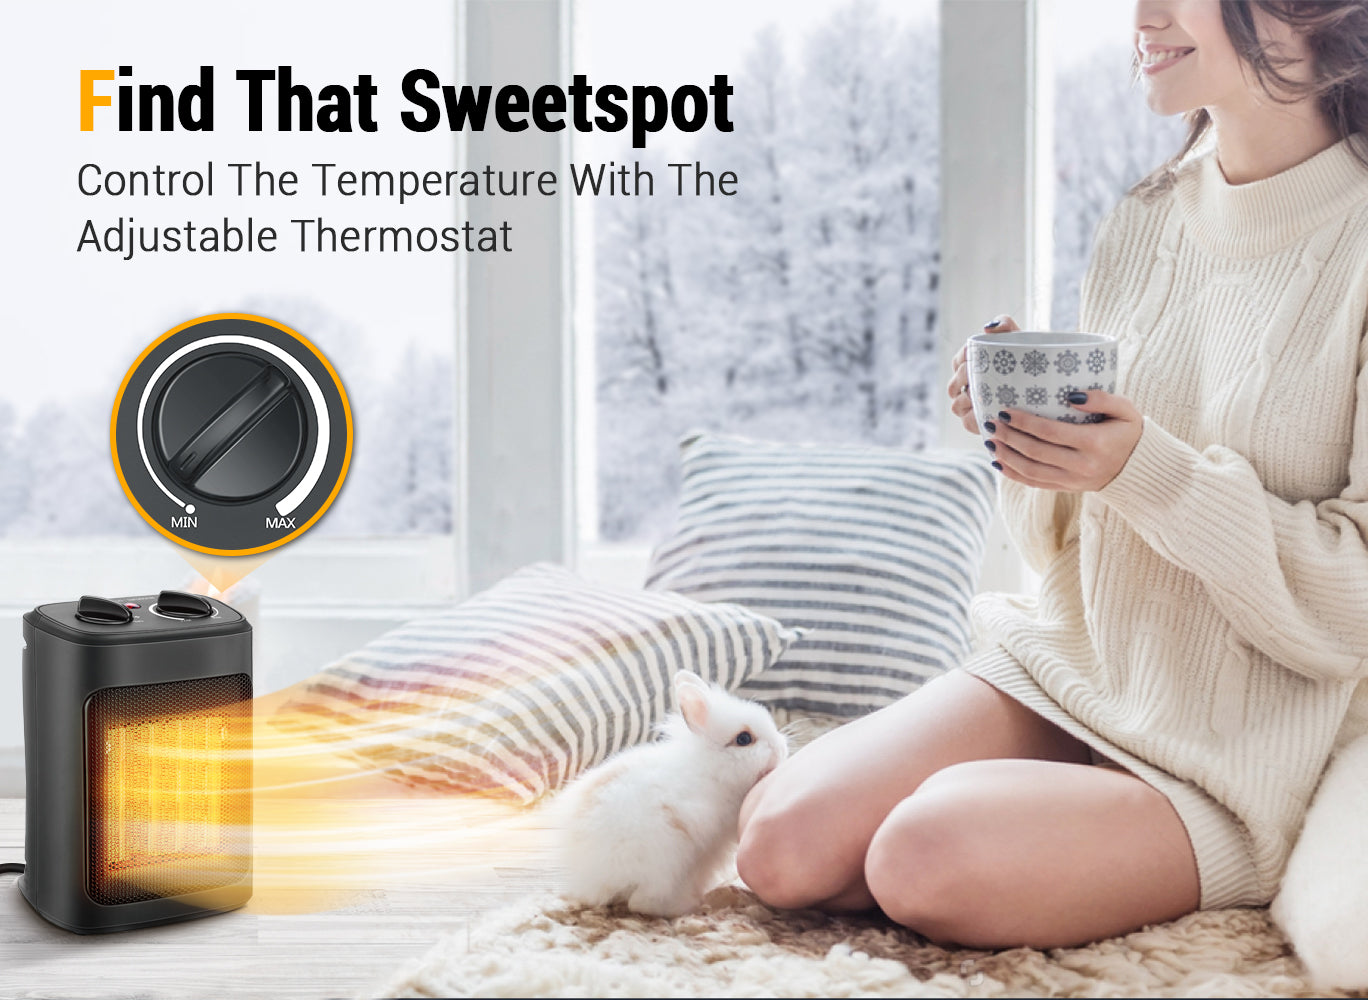 Space Heaters vs. Thermostats